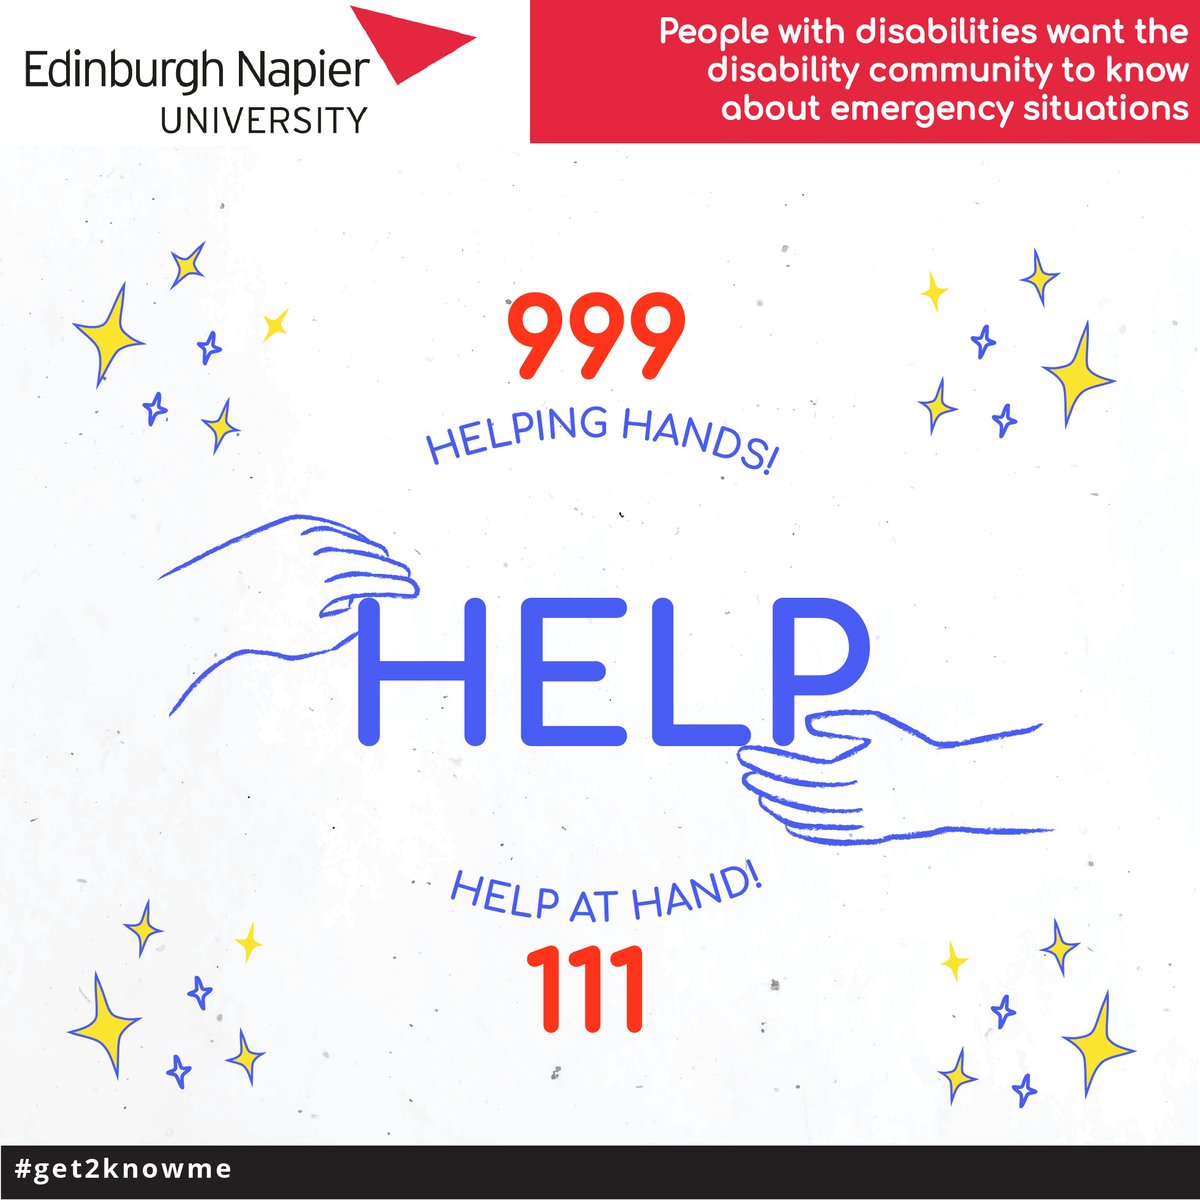 🚨What do people with disabilities want the disability community to know about emergency situations? The #get2knowme campaign shares messages that people want others to know. For example, you can help call 999 or 111 👇 #ScottishLearningDisabilityWeek #DigitalInclusion